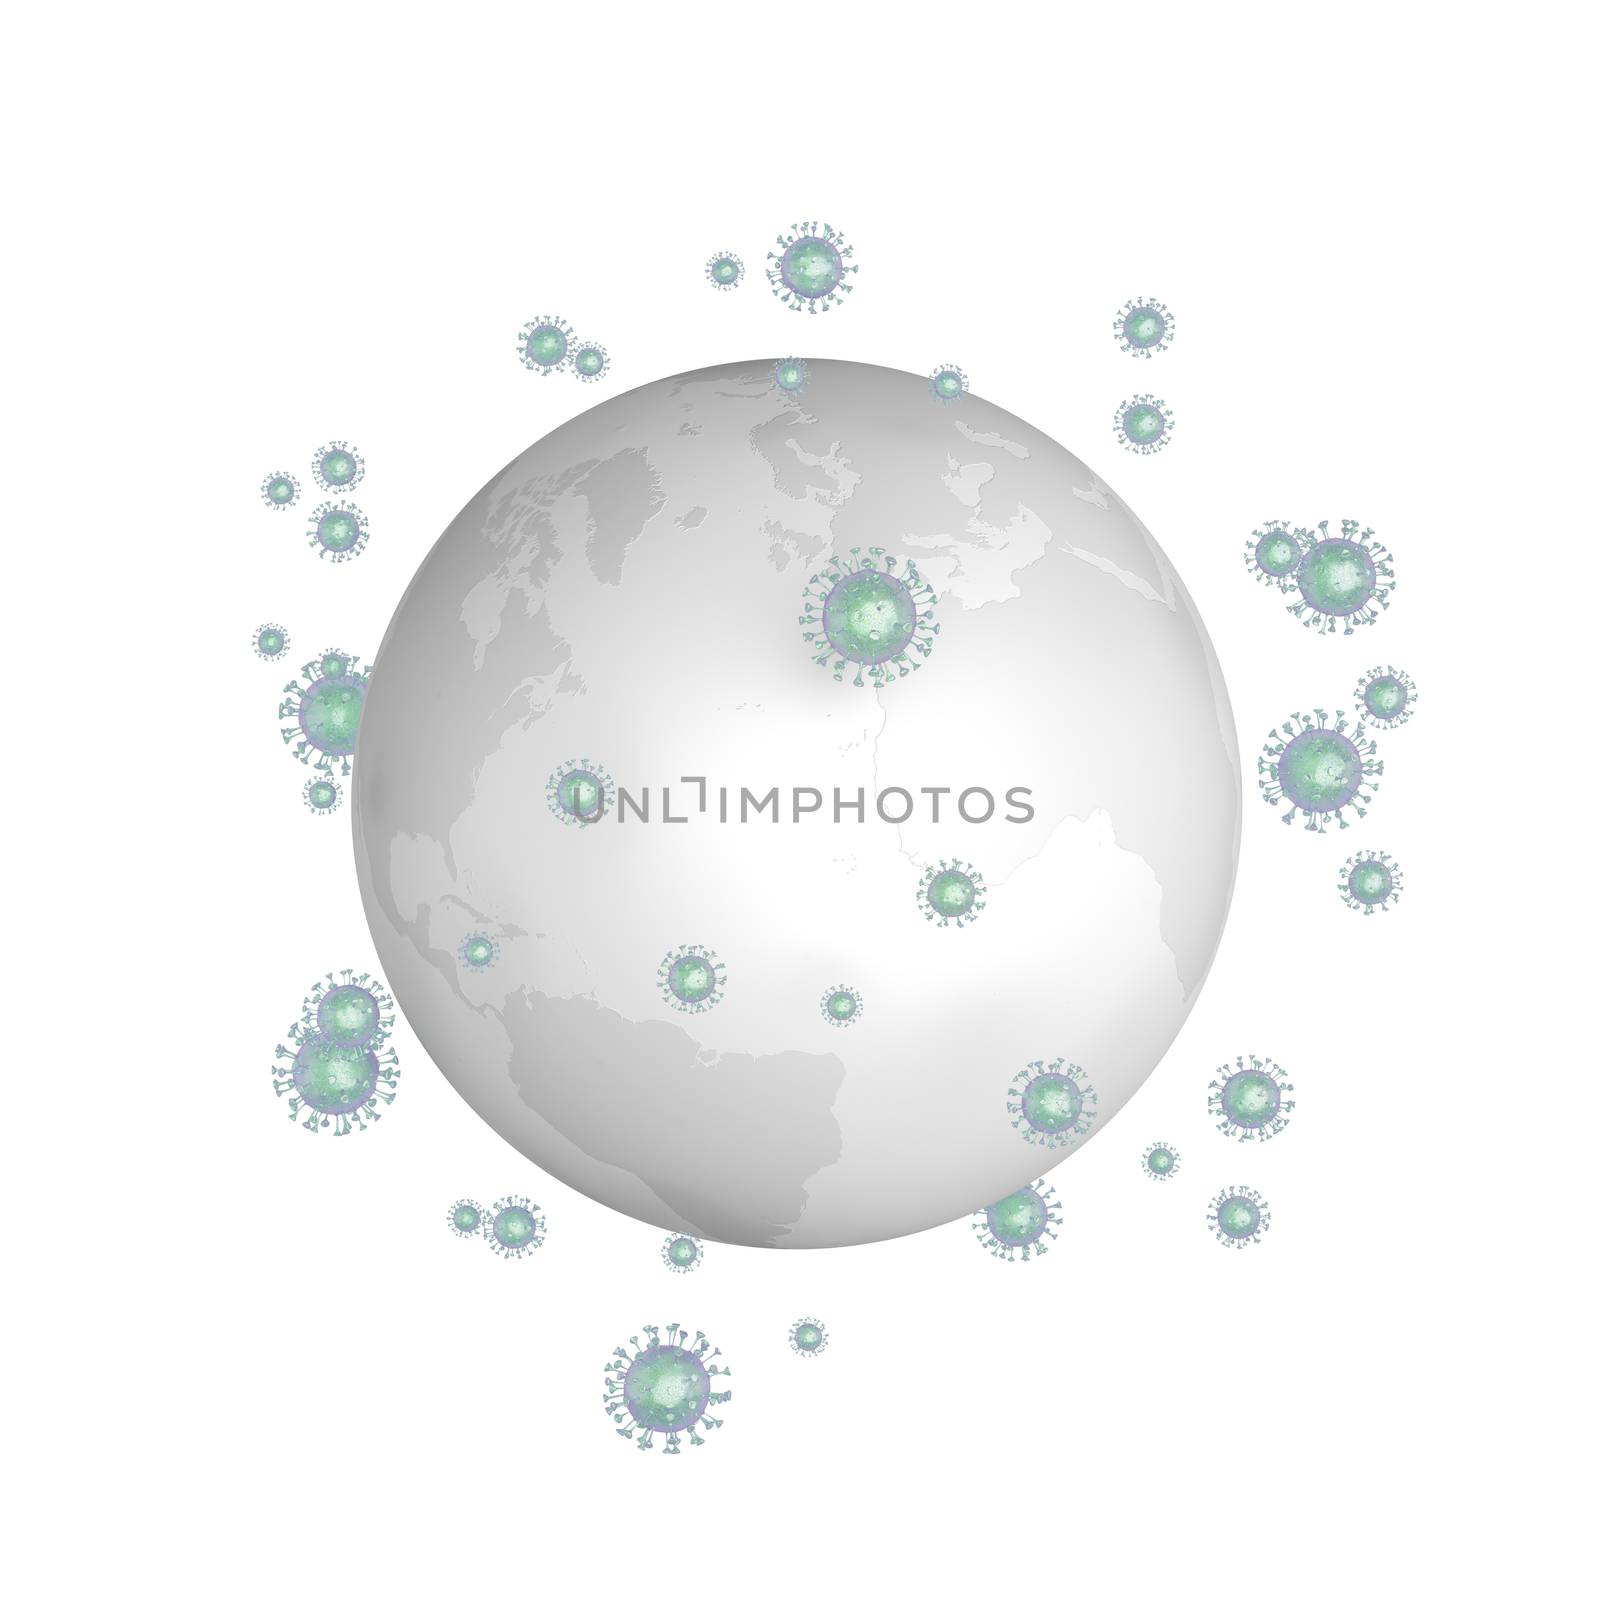 Concept image with many viruses around the earth for coronavirus disease COVID-19 pandemic